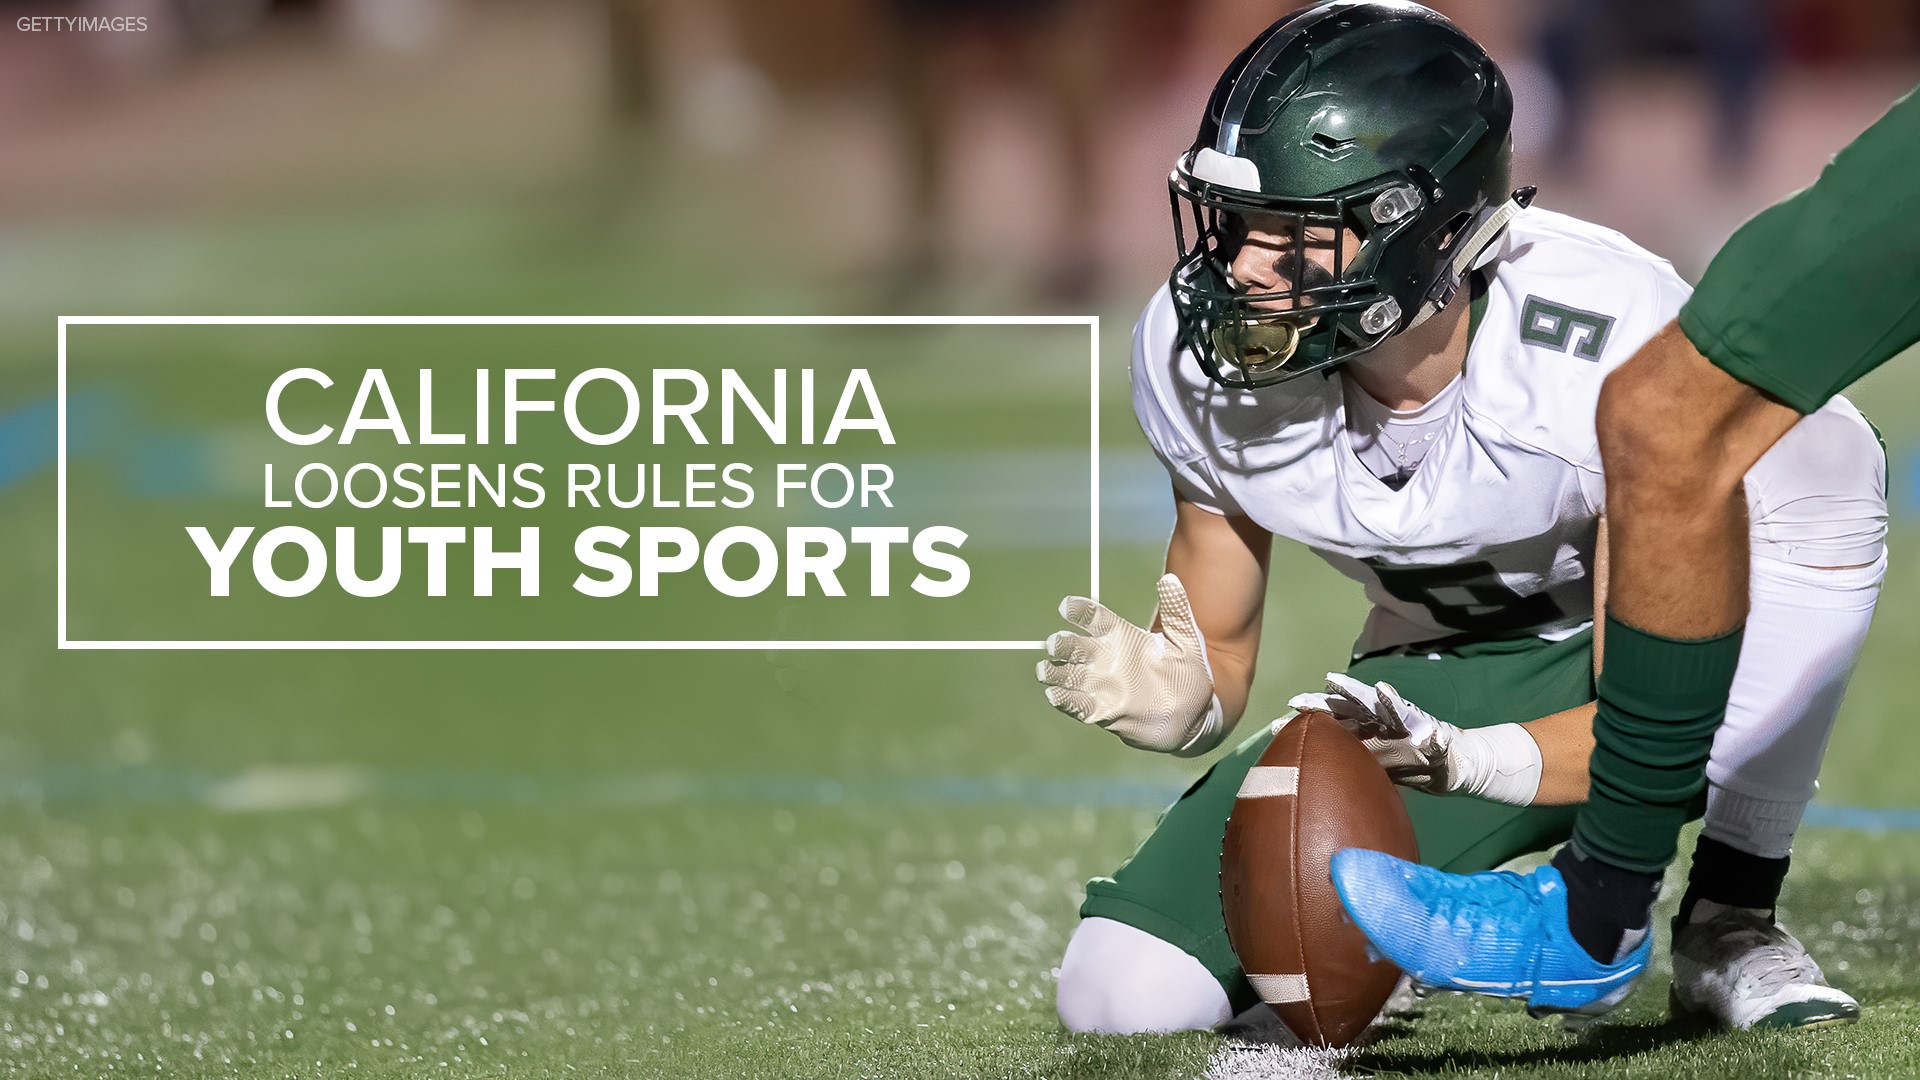 Counties need a case rate at or below 14 per 100,000. Currently, San Diego County is ineligible to start youth sports due to the case rate being 22.2 in the county.